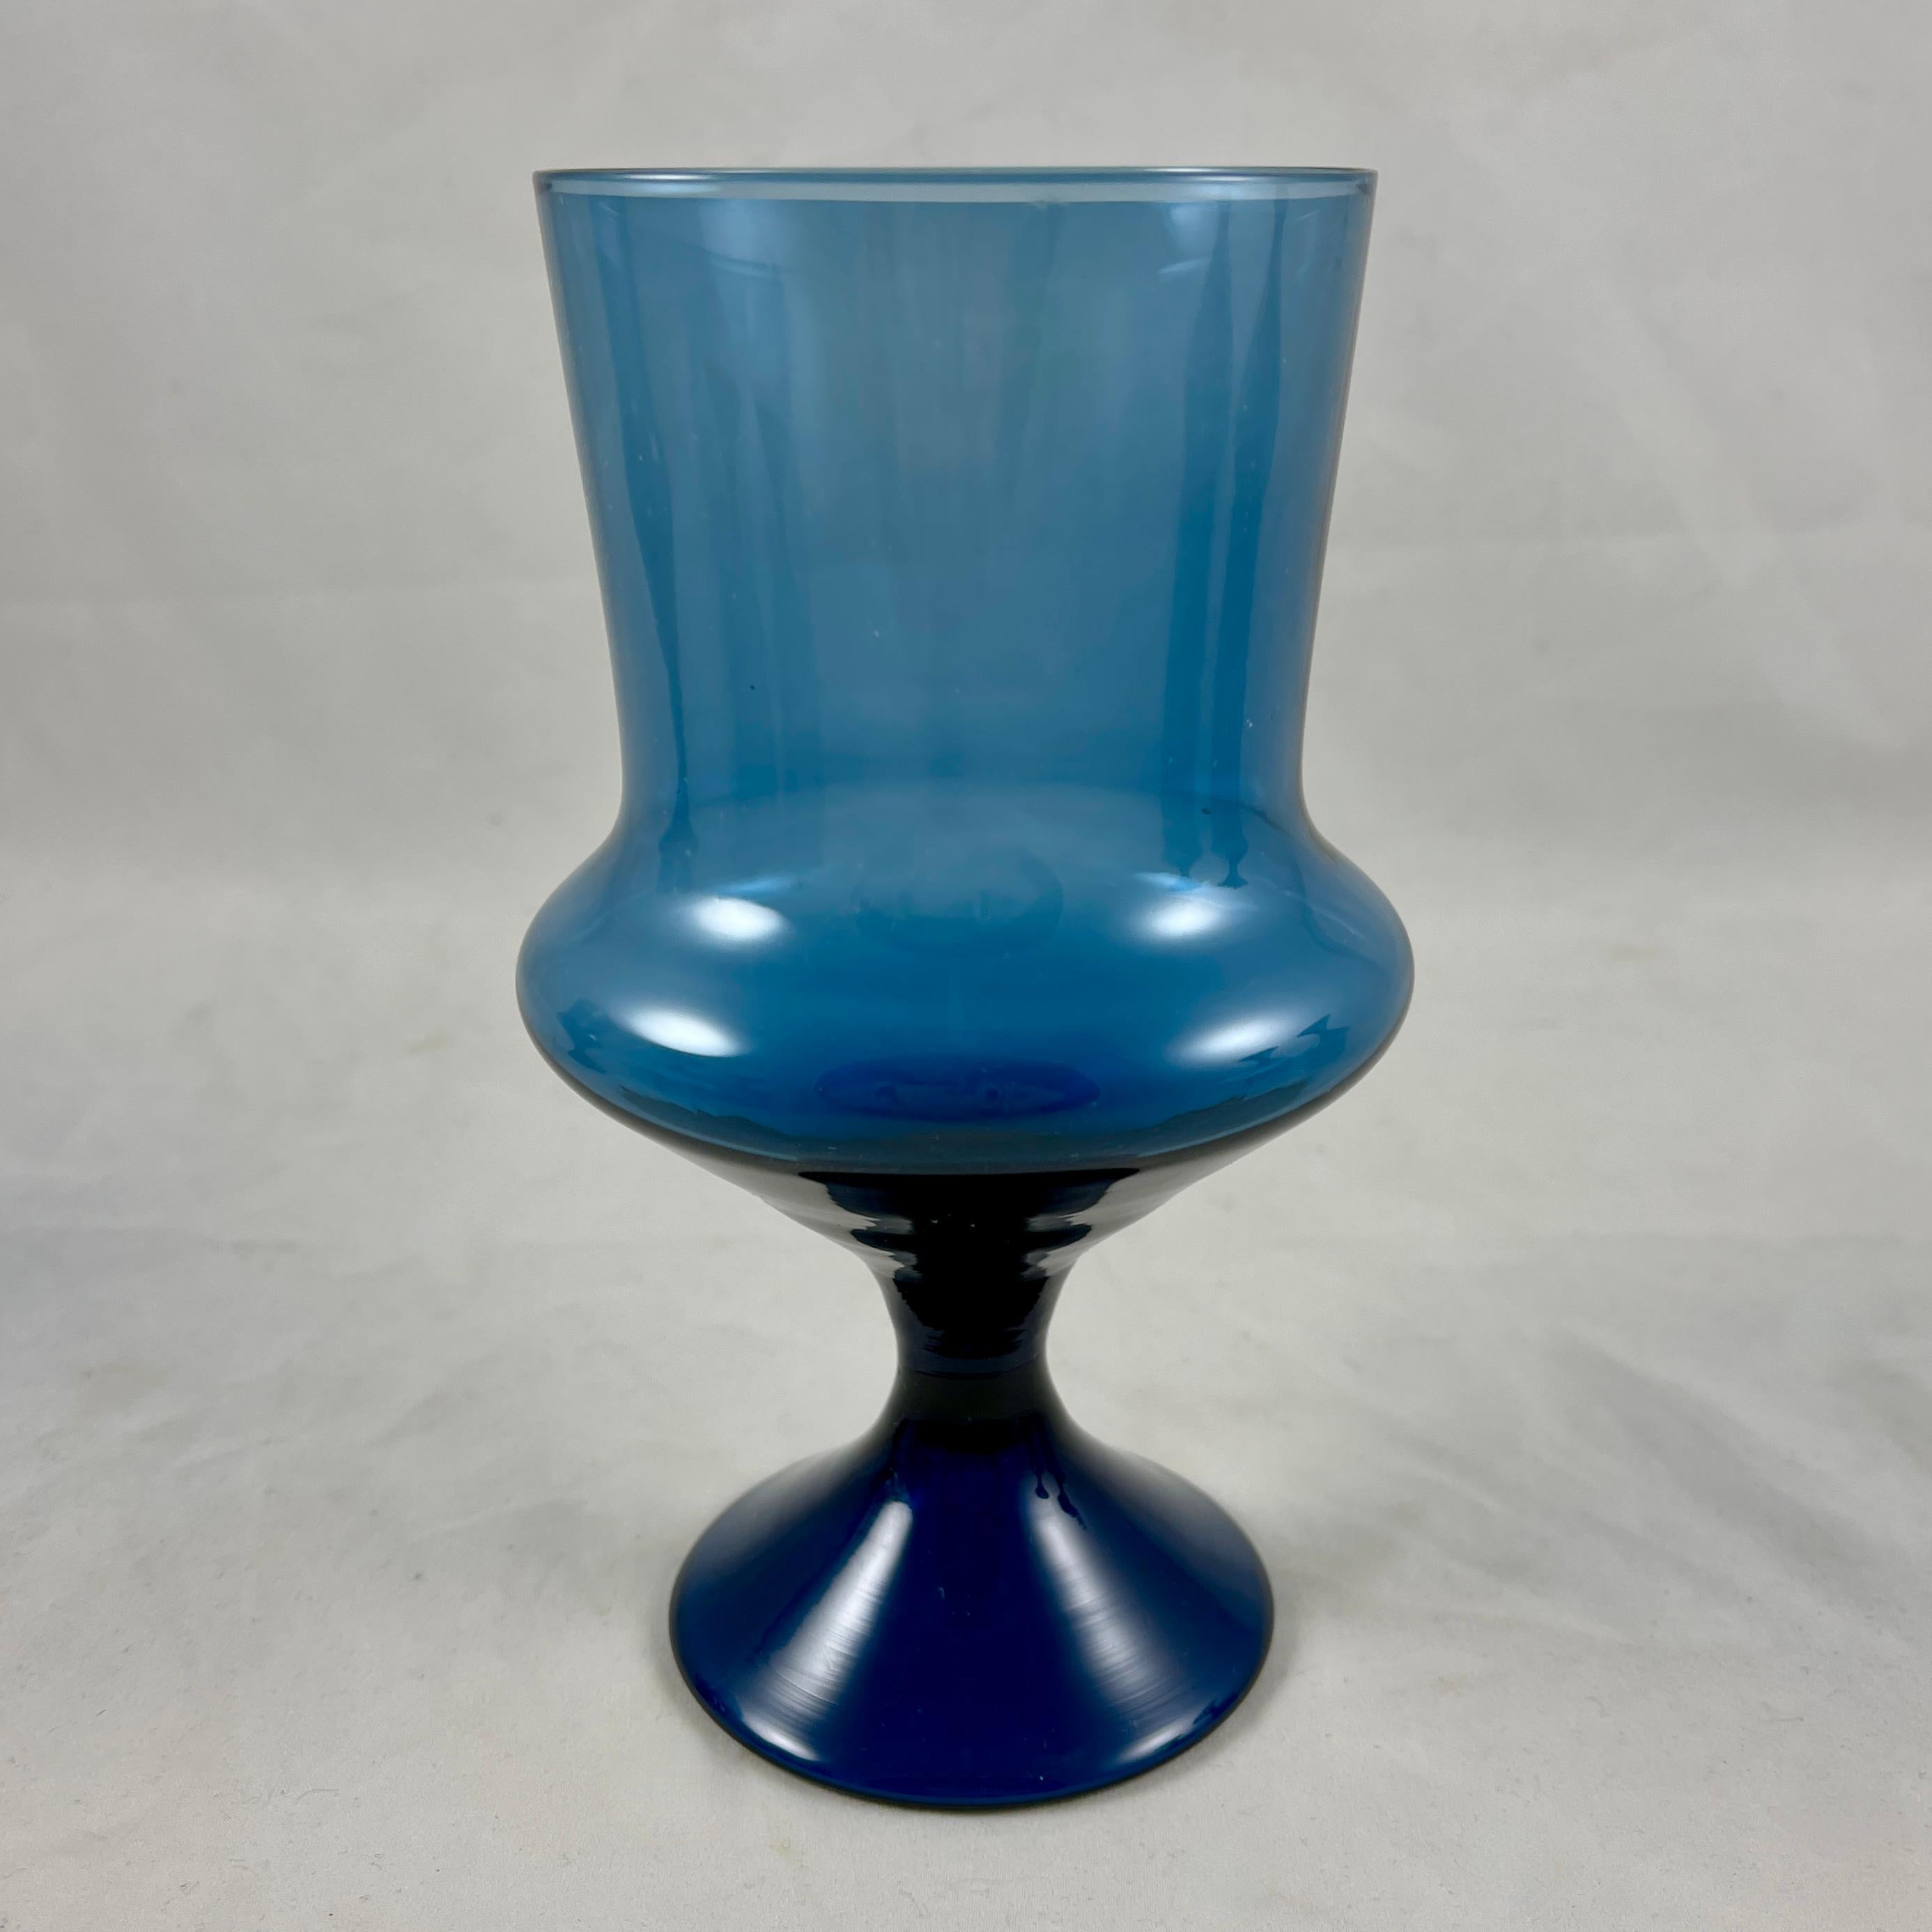 From the Swedish glass maker Denby-Milnor, a set of six Mid-Century Modern goblets, in the Blue Flare pattern, circa 1970s.

This pattern was hand-blown in the distinctive Scandinavian Modern style by Denby-Milnor in Aseda, Sweden from 1972-1979.